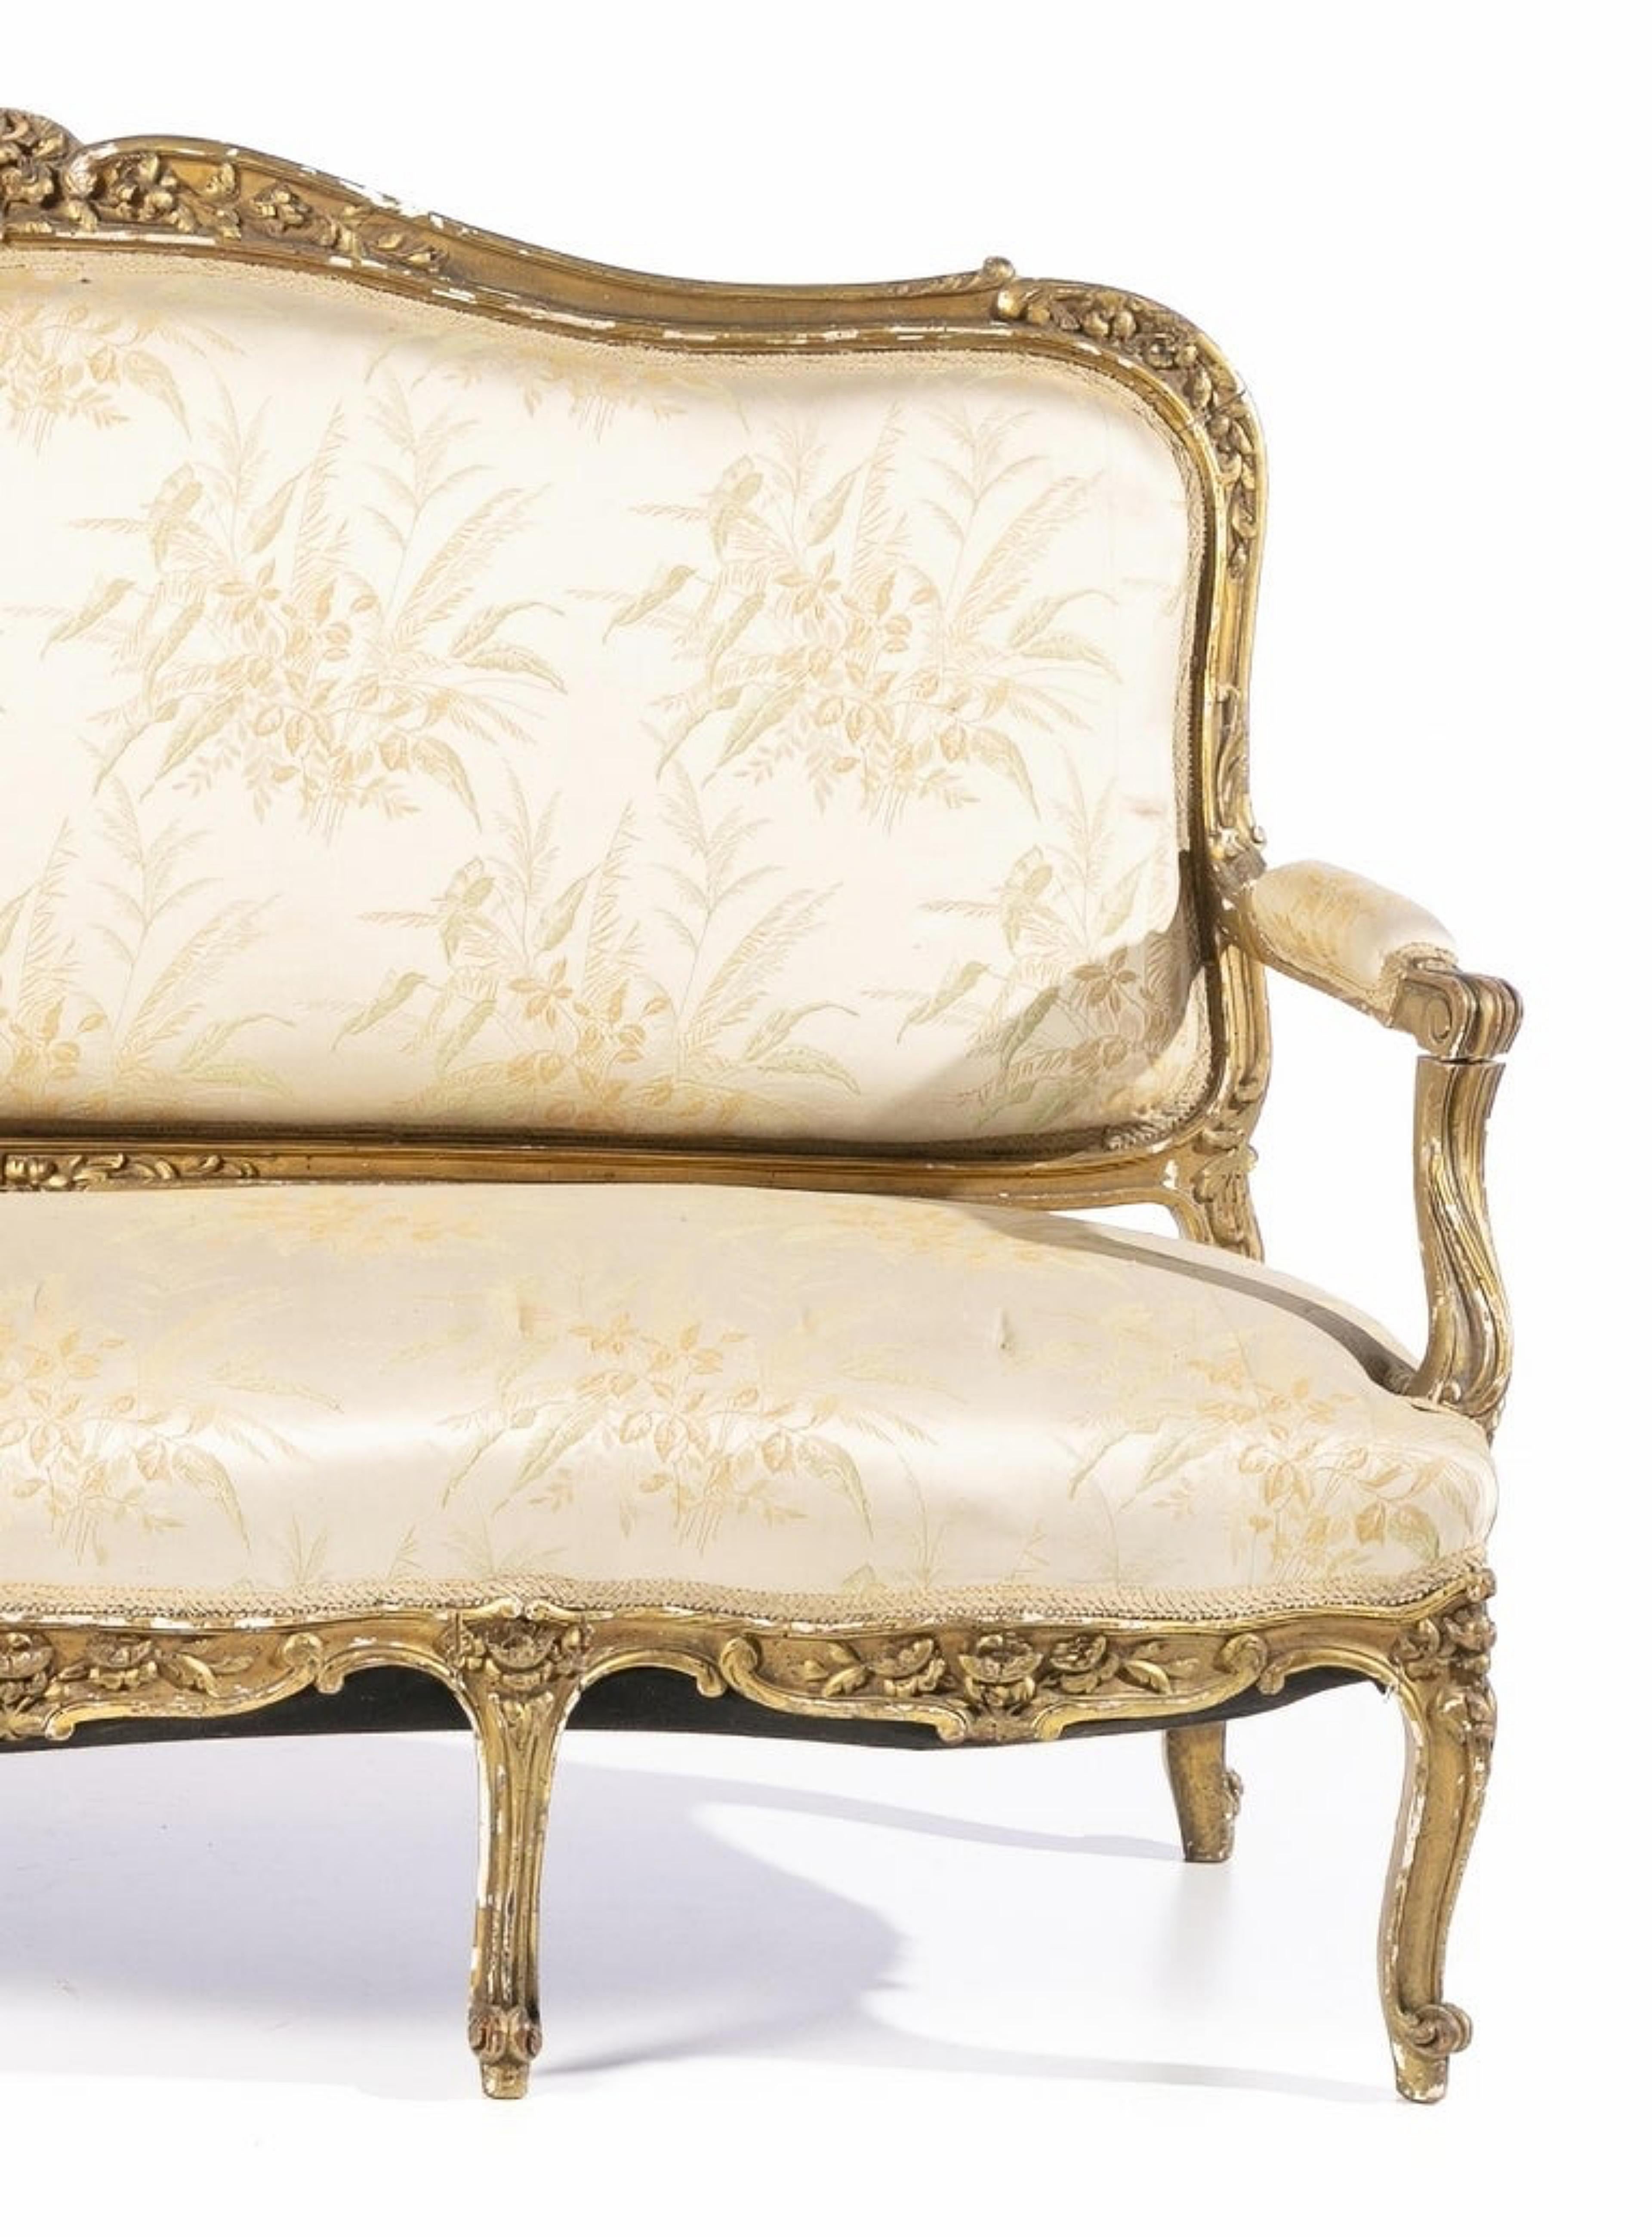 Rococo Beautiful French Canape 18th Century For Sale